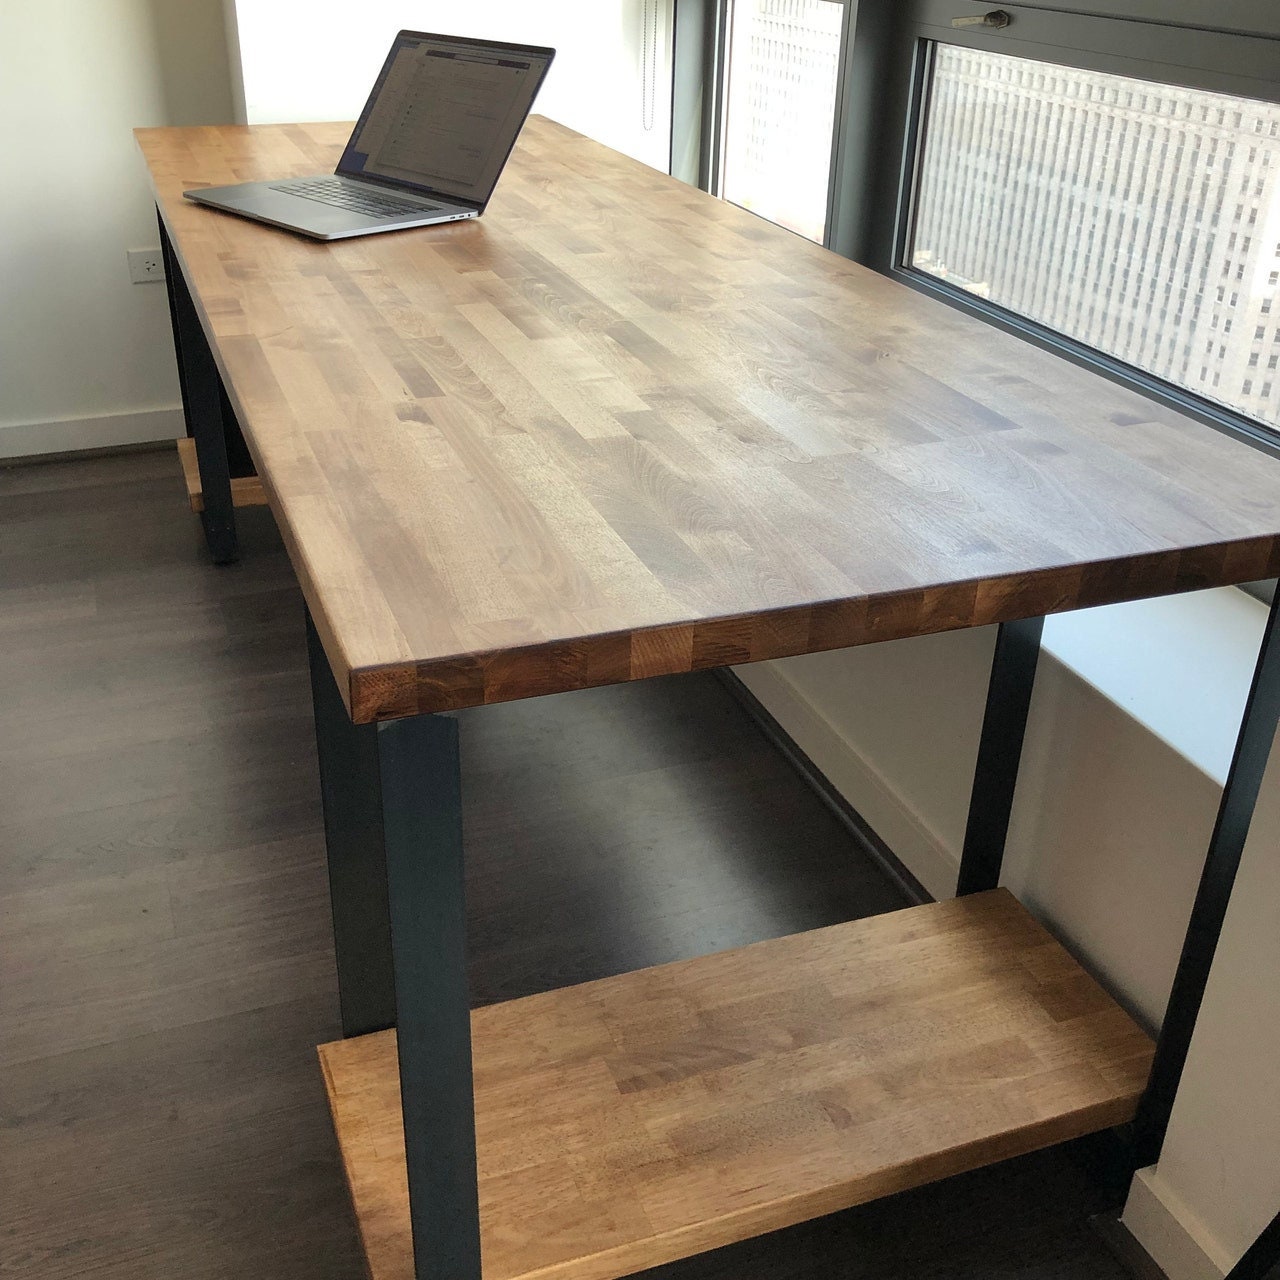 Let's go! Custom L desk made from butcher block. 5'2” x 8', and 25